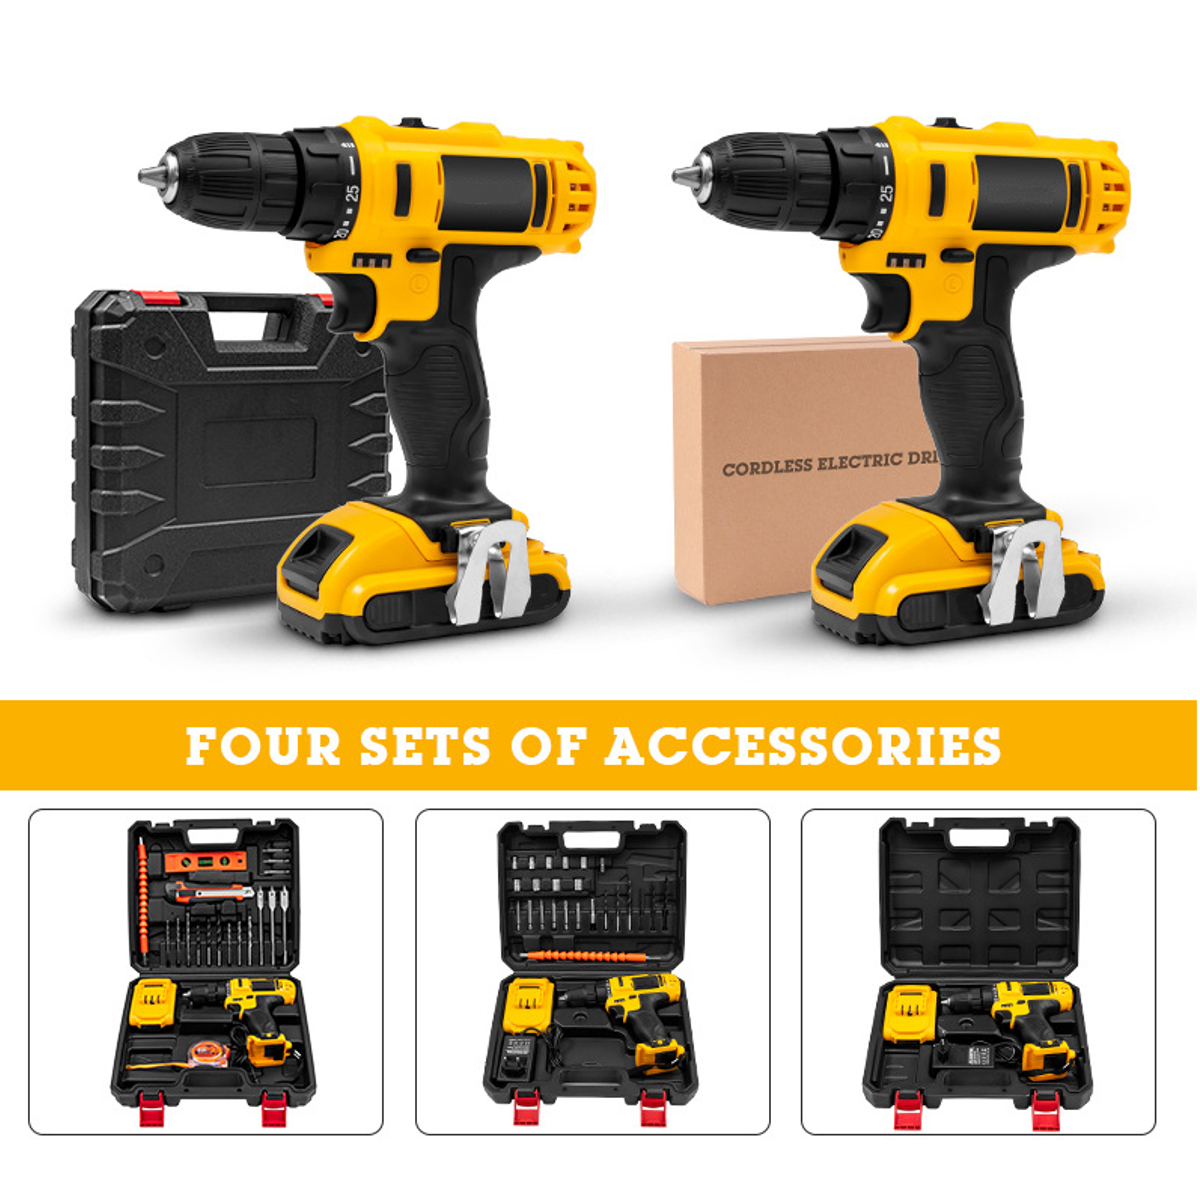 21V-520Nm-Electric-Drill-Cordless-Rechargeable-Screwdriver-Hammer-Drill-Set-w-Battery-1855055-5